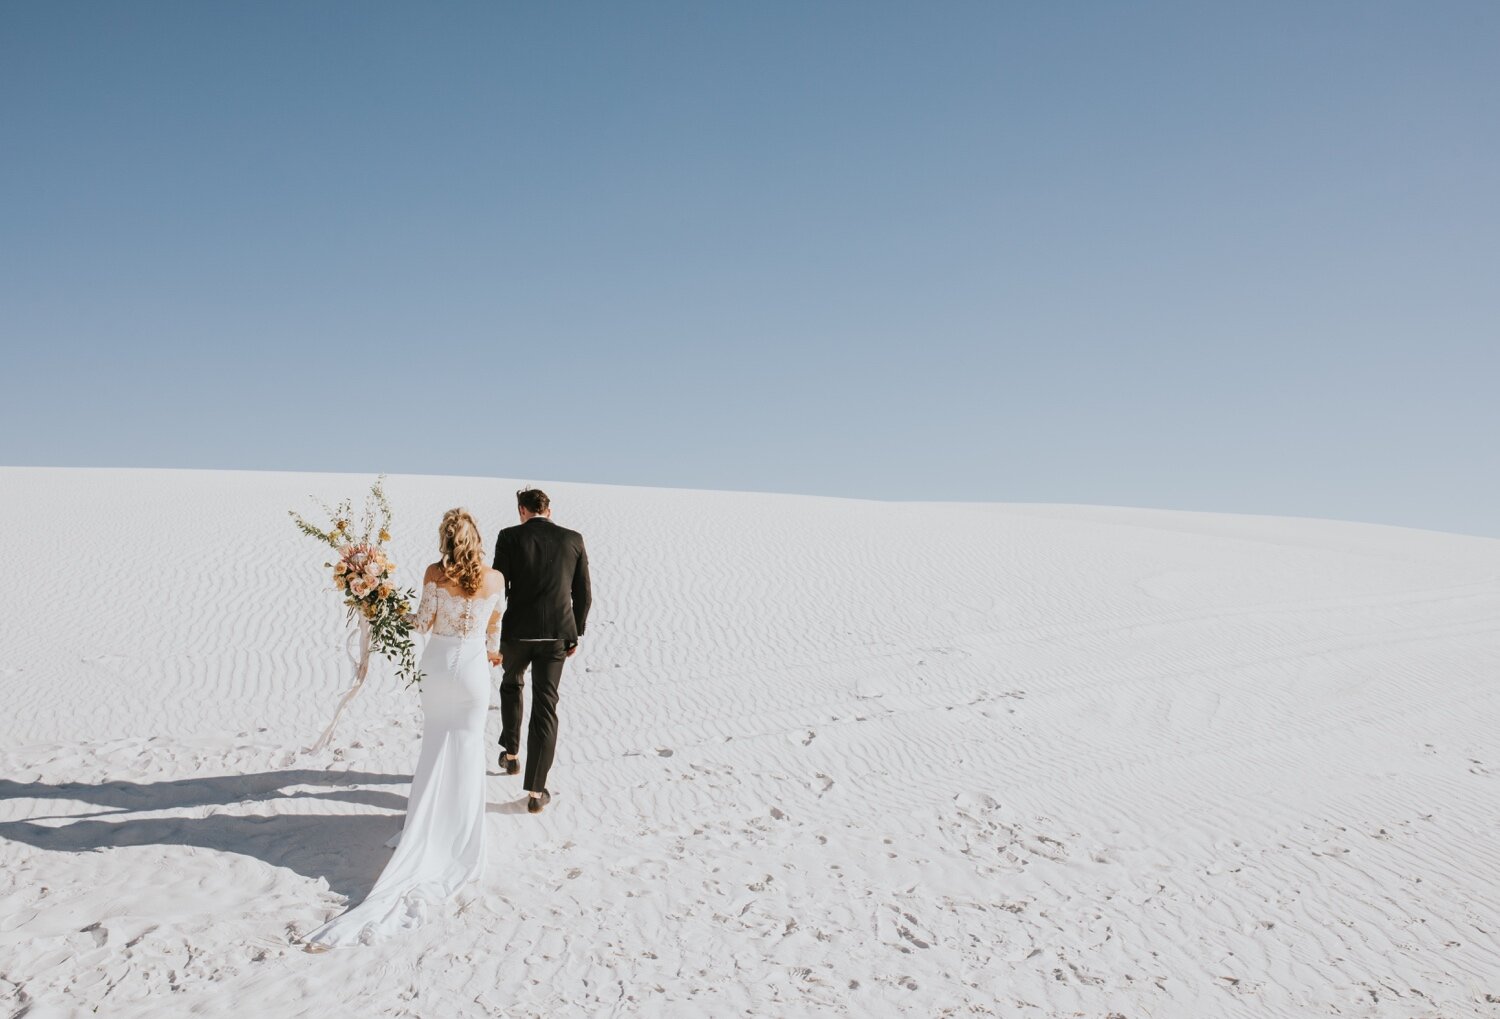 White Sands National Monument, New Mexico Wedding, White Sands Wedding, White Sands Elopement, Las Cruces Wedding Photographer